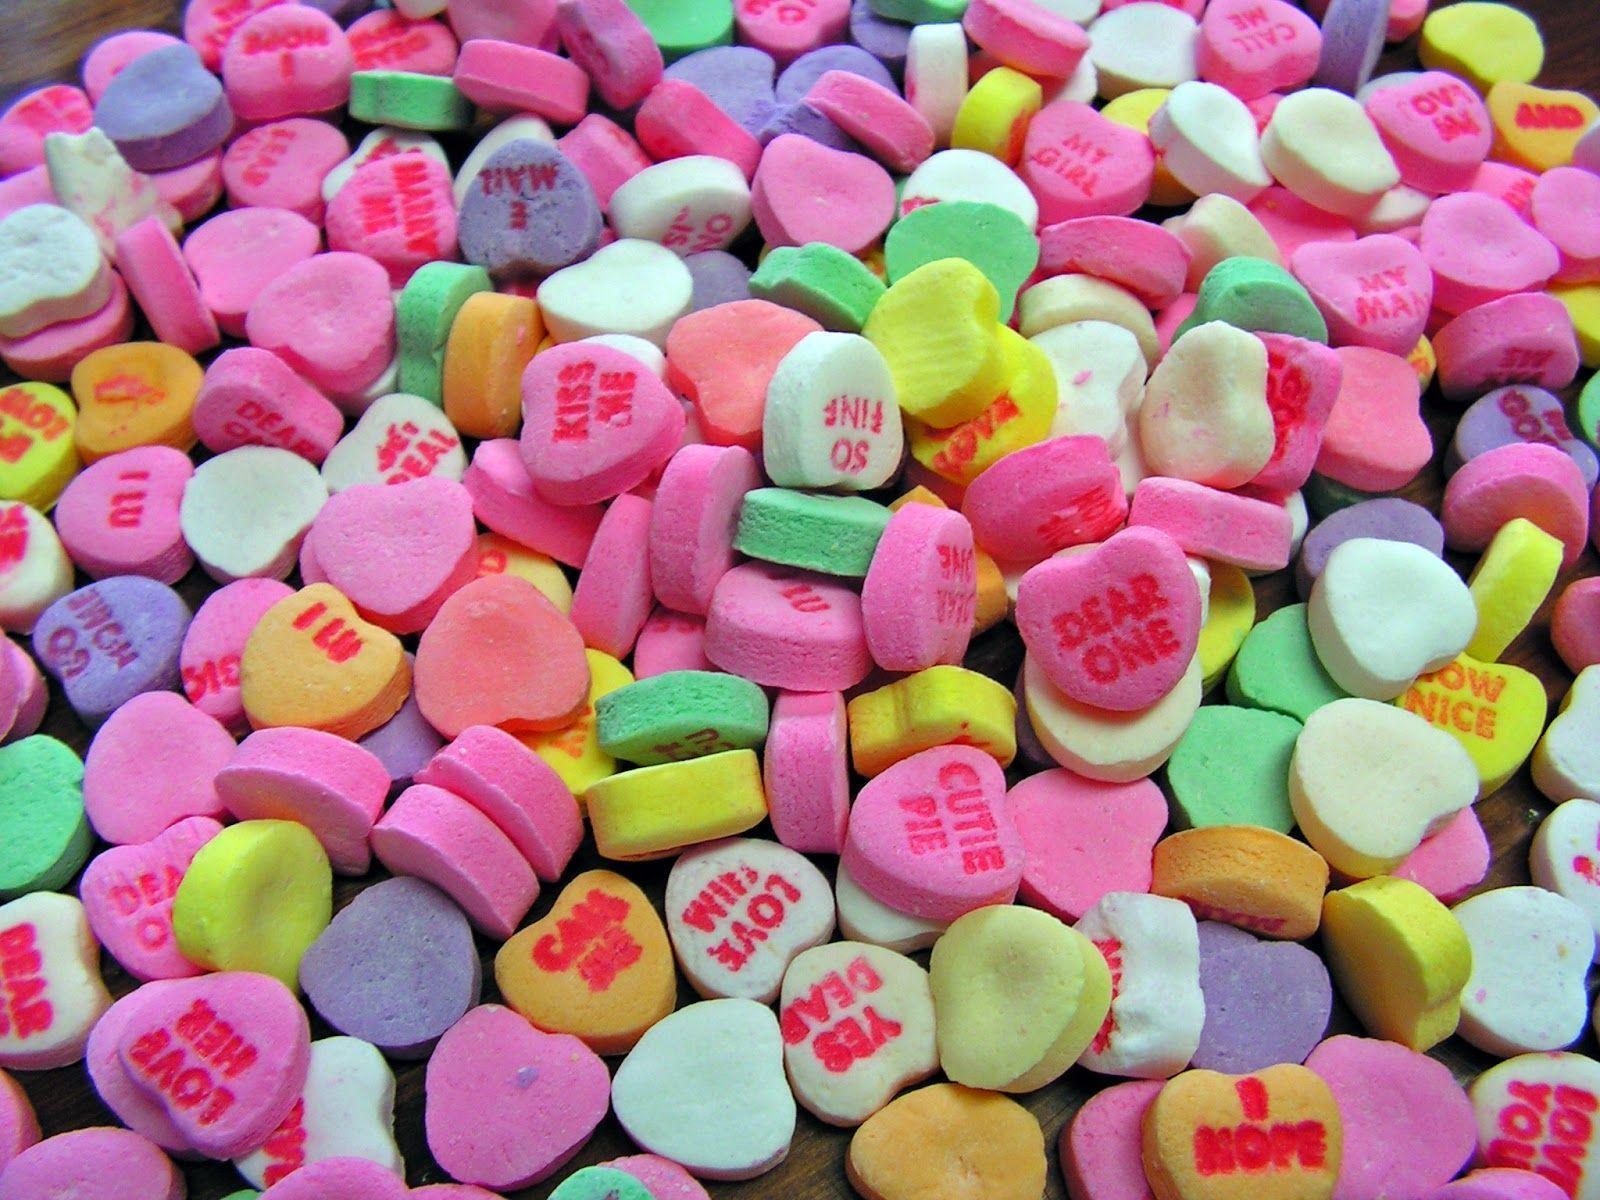 HD wallpaper Saint Valentines Day Candy heartshaped assortedcolor candy  lot with box  Wallpaper Flare